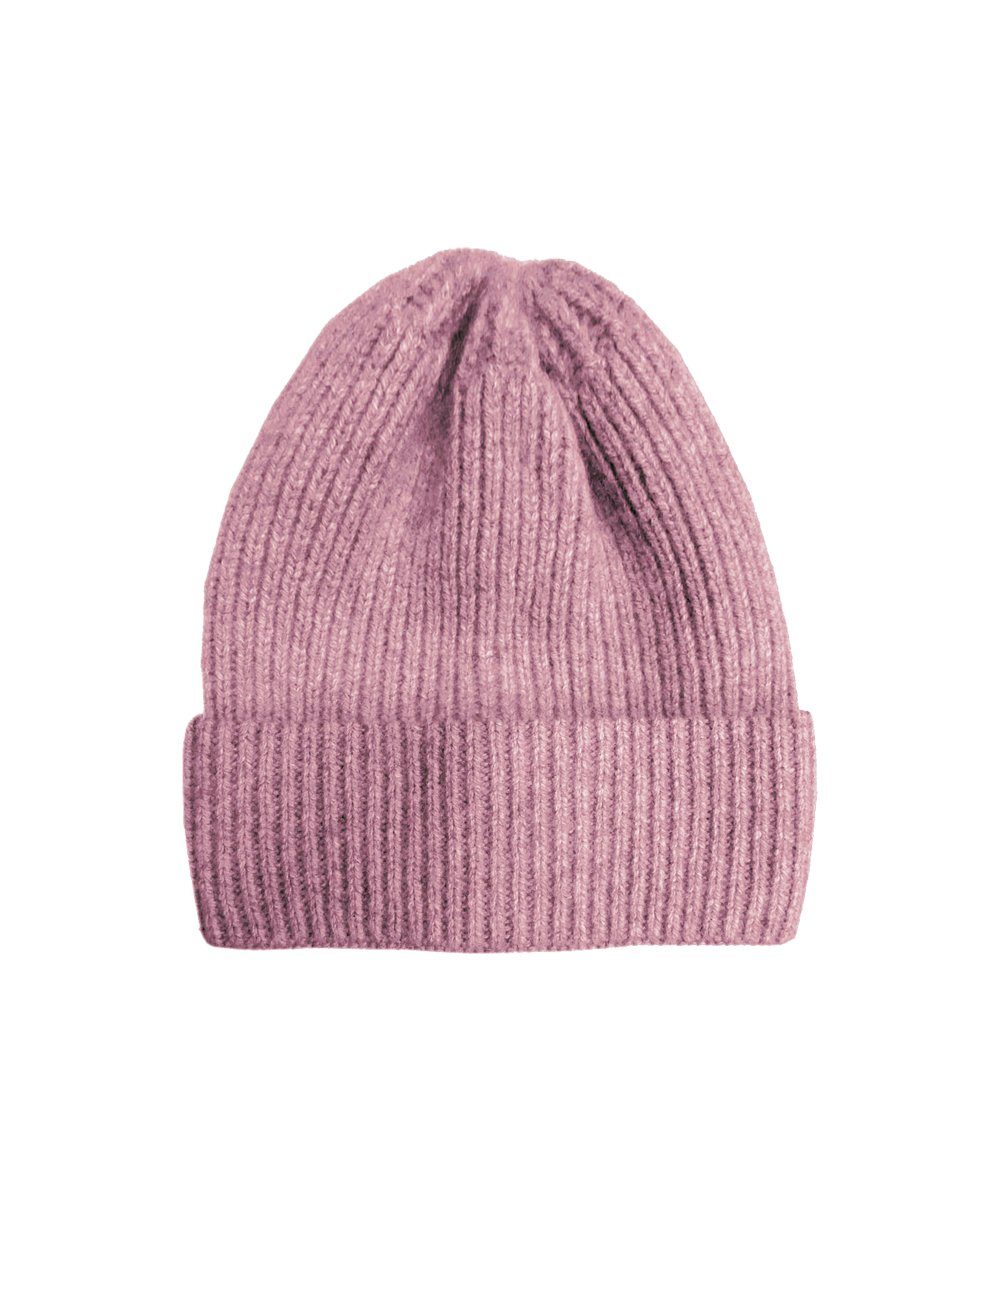 CAPO Strickmütze CAPO-DOUX CAP knitted cap, malve up ribbed, LONG turn Europe in Ka Made